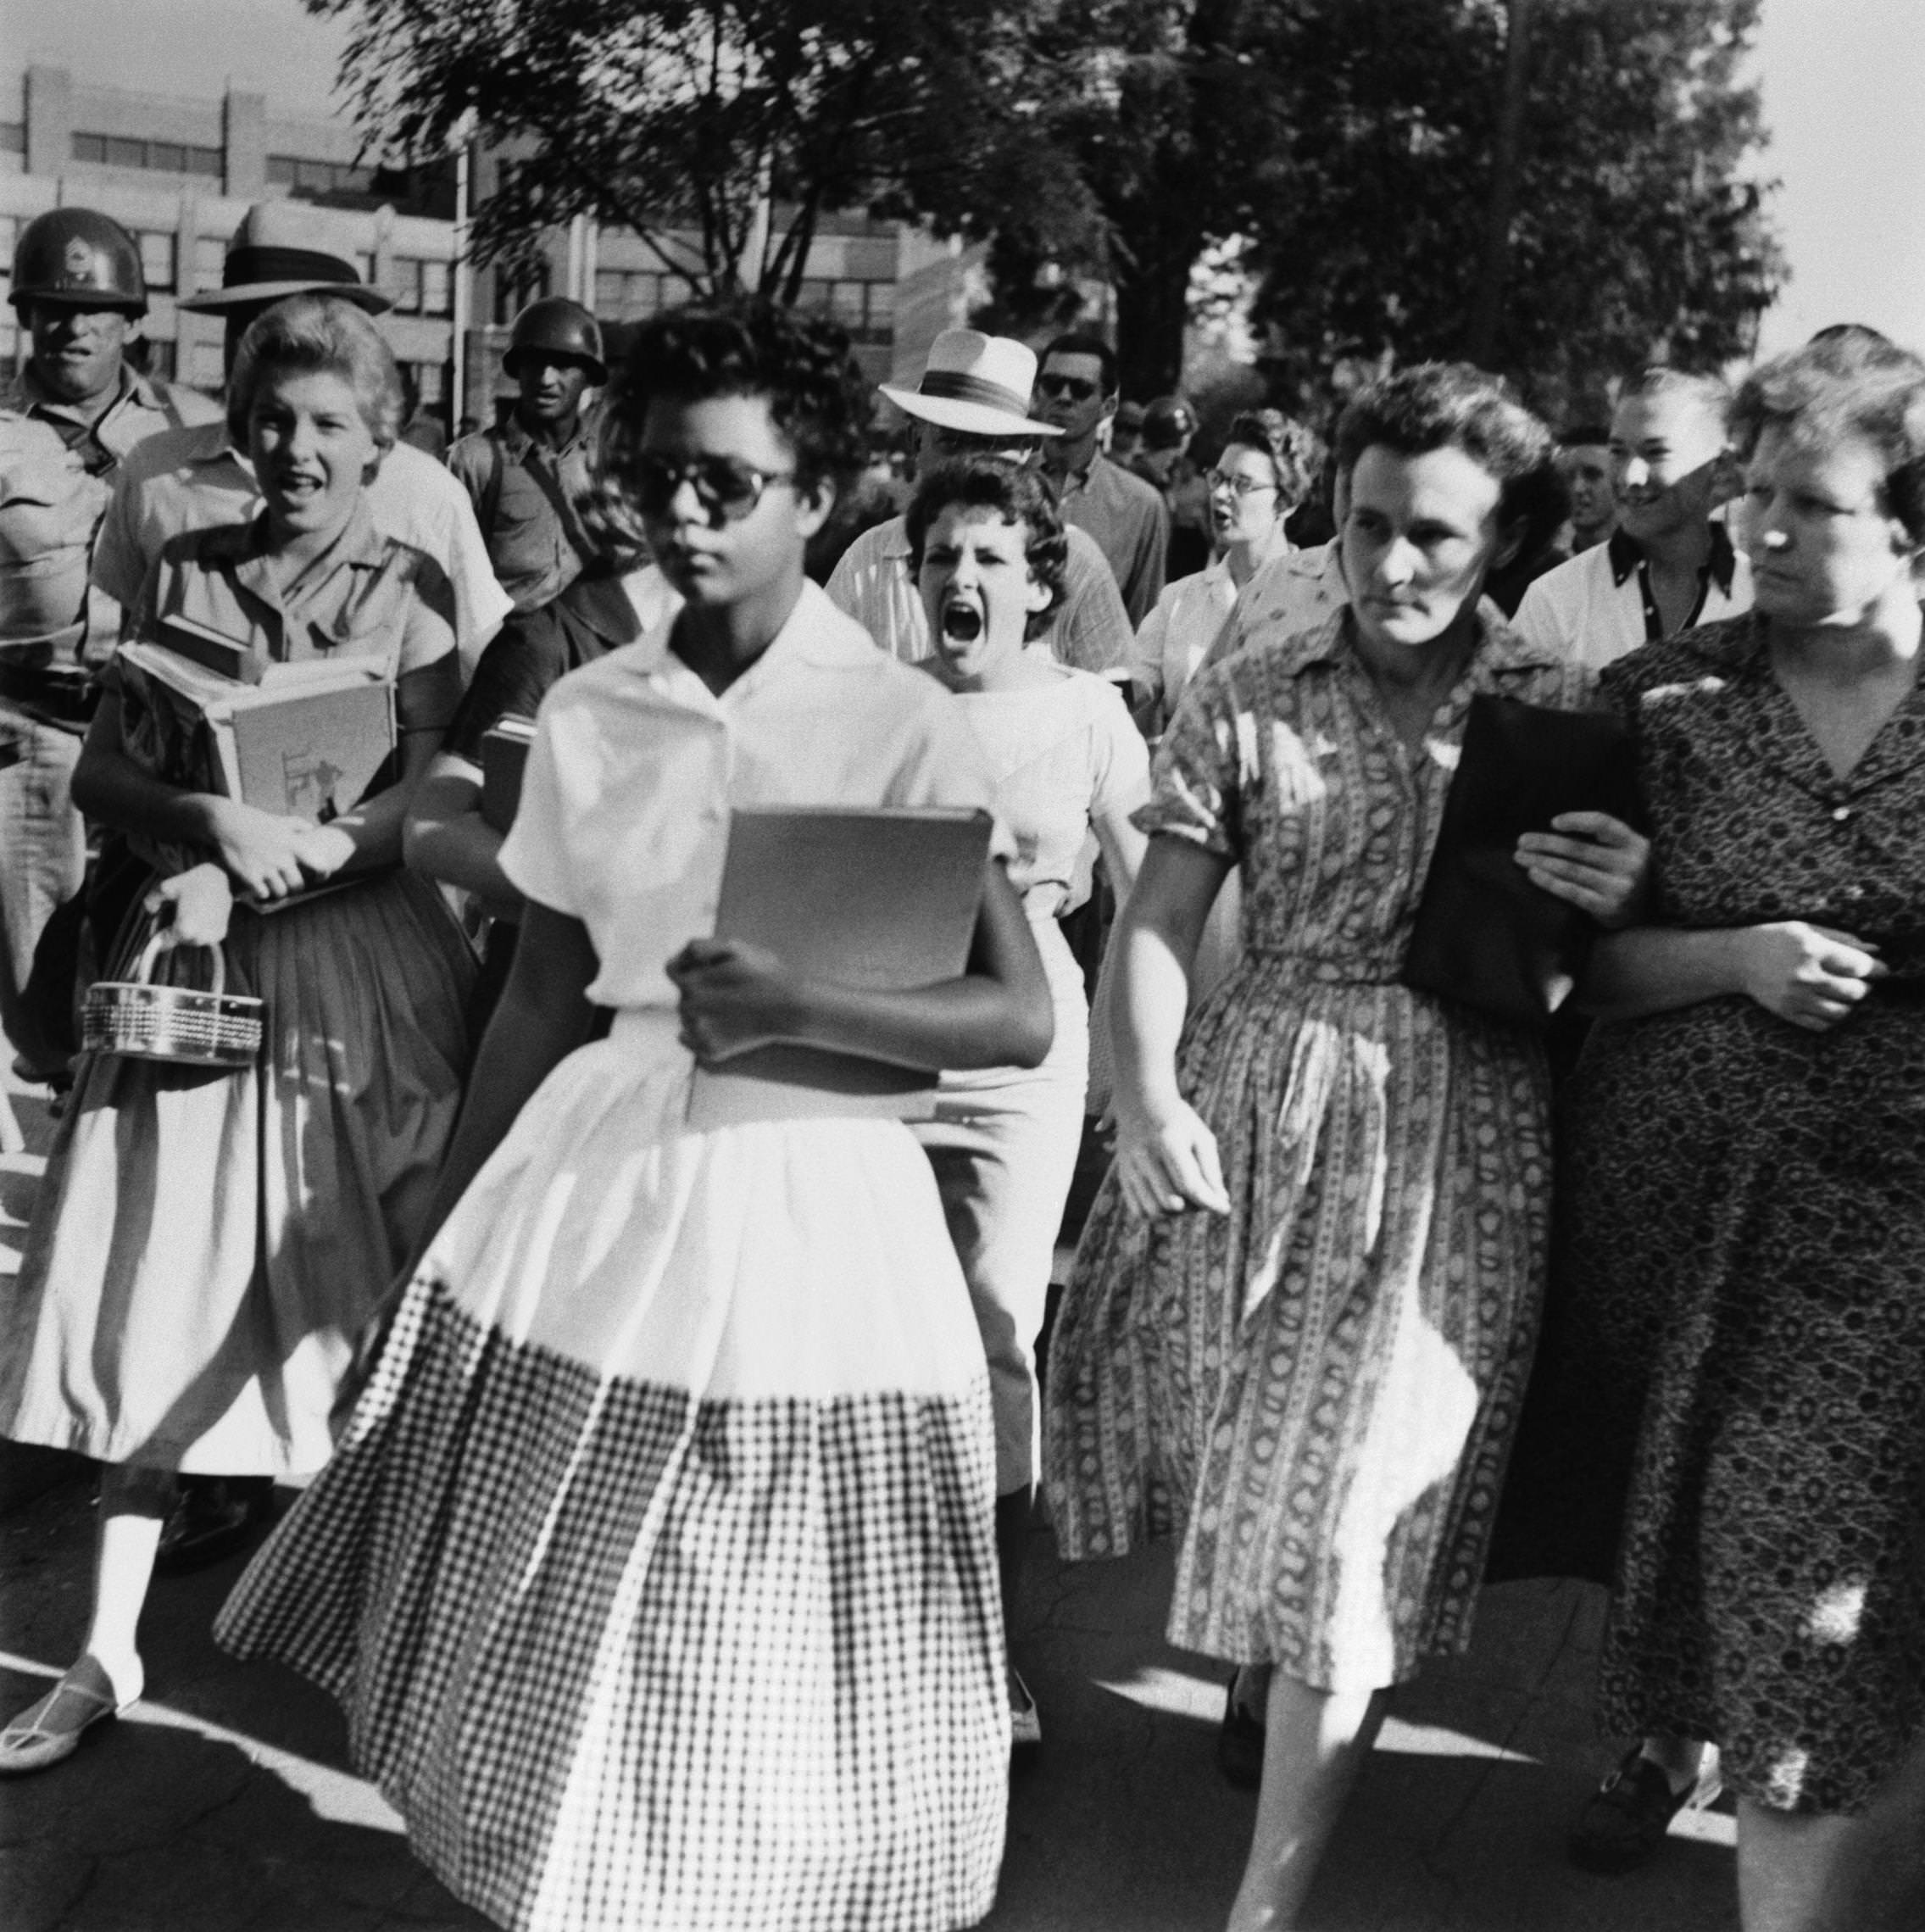 Elizabeth Ann Eckford, one of the 9 black students who desegregated Little Rock Central High School, being heckled by other school girls and their mothers as she heads into school in Arkansas, US in 1957.